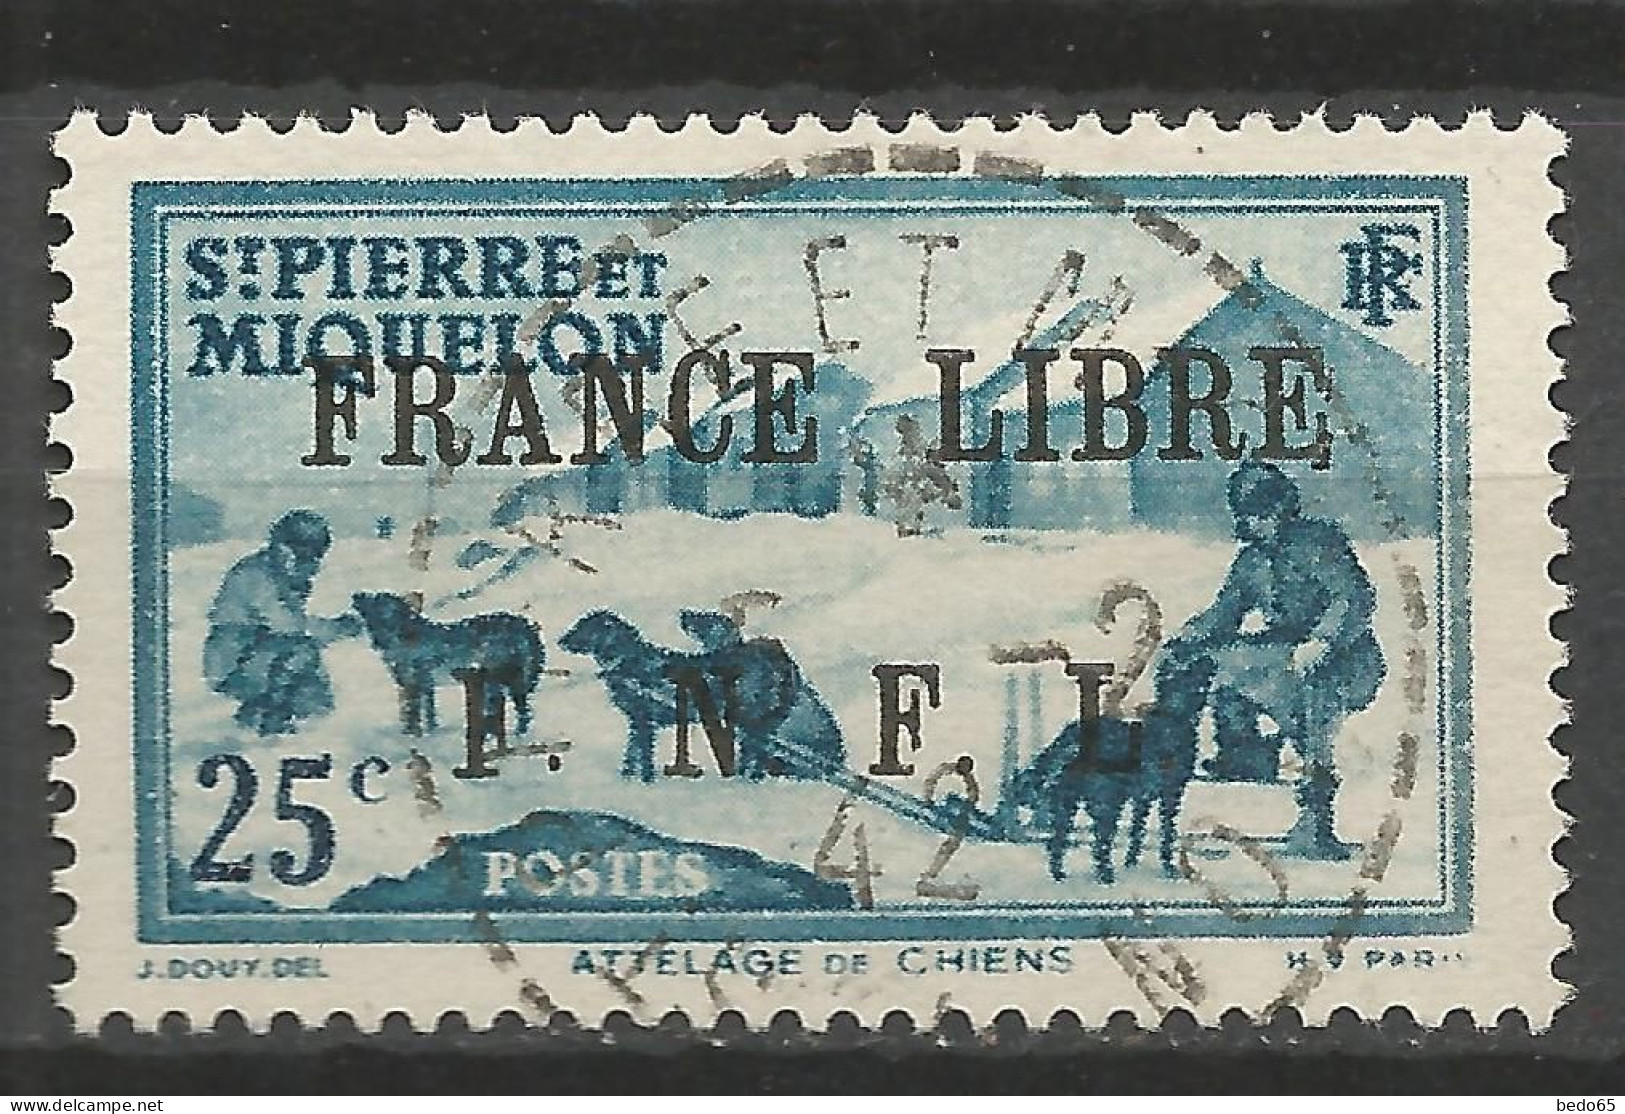 MARTINIQUE N° 253 OBL  /Used - Used Stamps